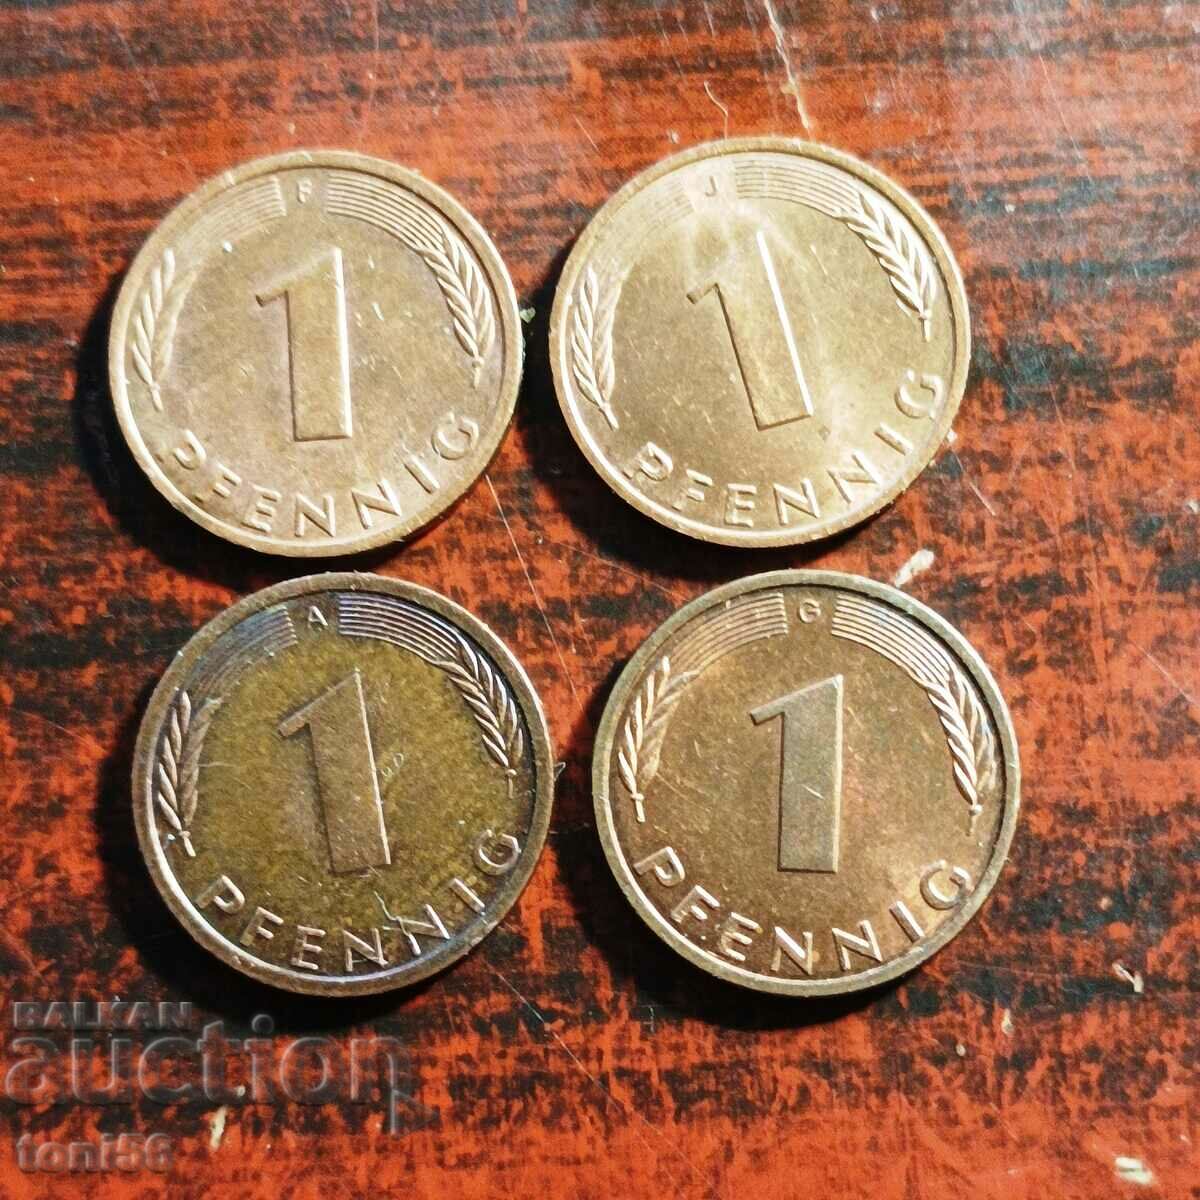 Germany - GDR, 4x1 pfennig, various years and mon. yards